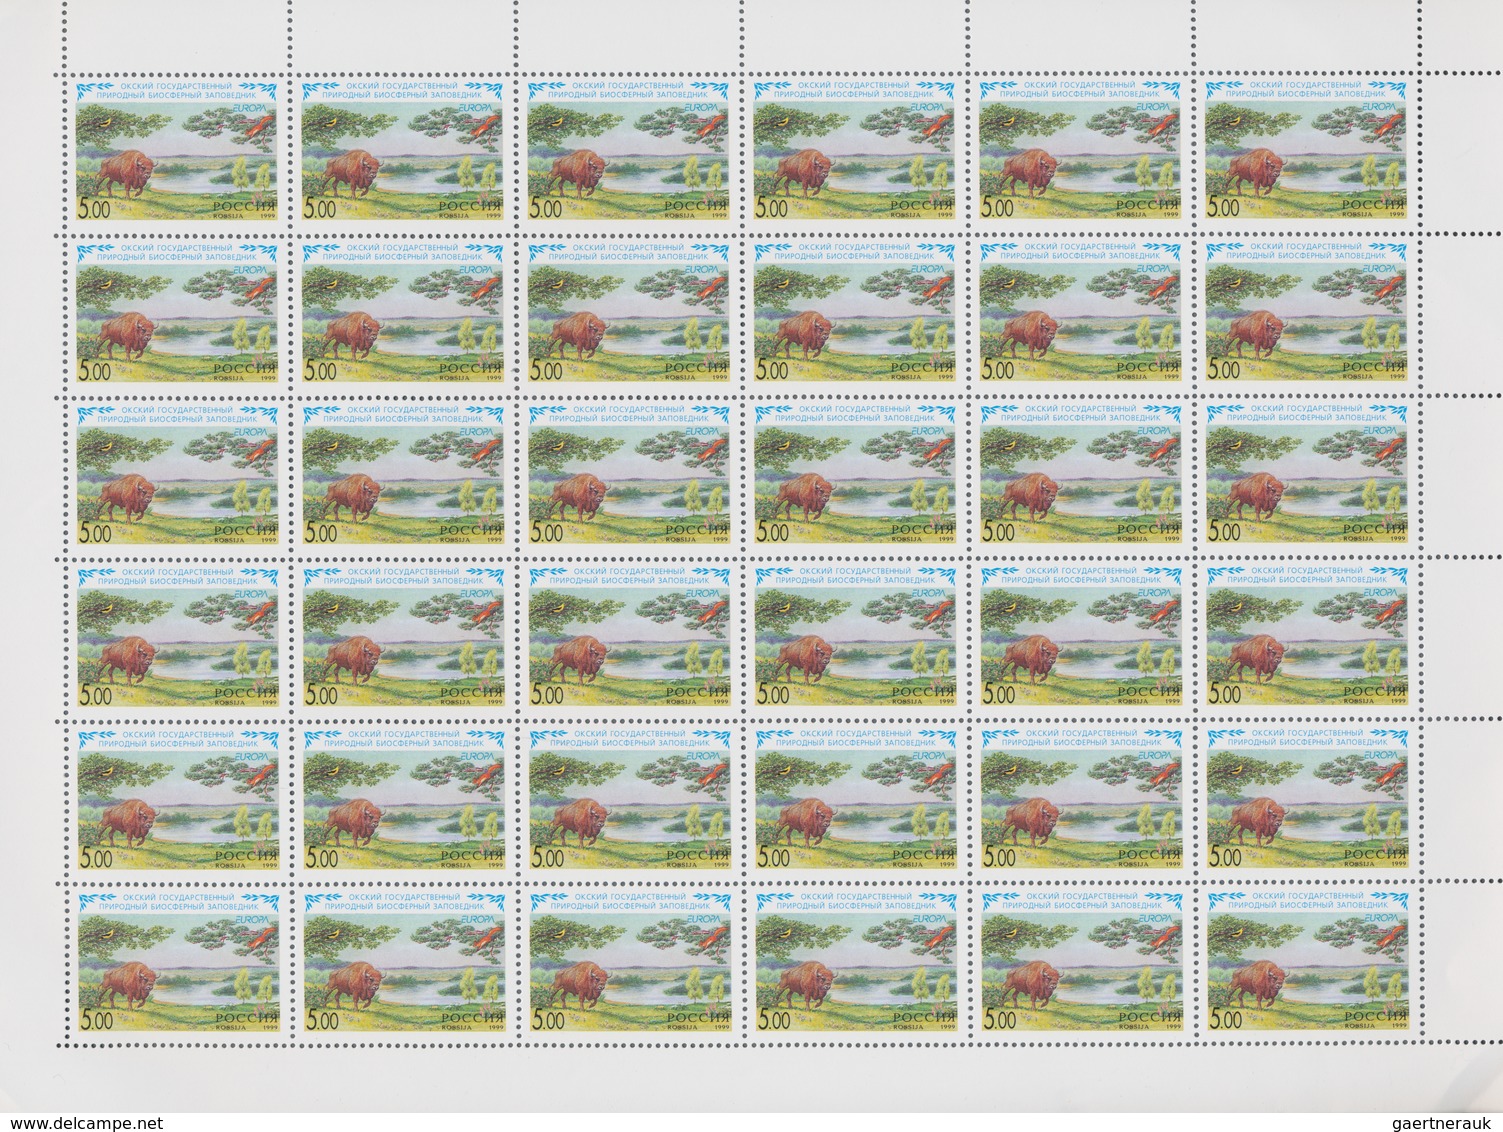 Russland: 1999, Europa (Bison), 3600 Sets Of This Issue In Sheets Of 36 Stamps Each, Mint Never Hing - Cartas & Documentos